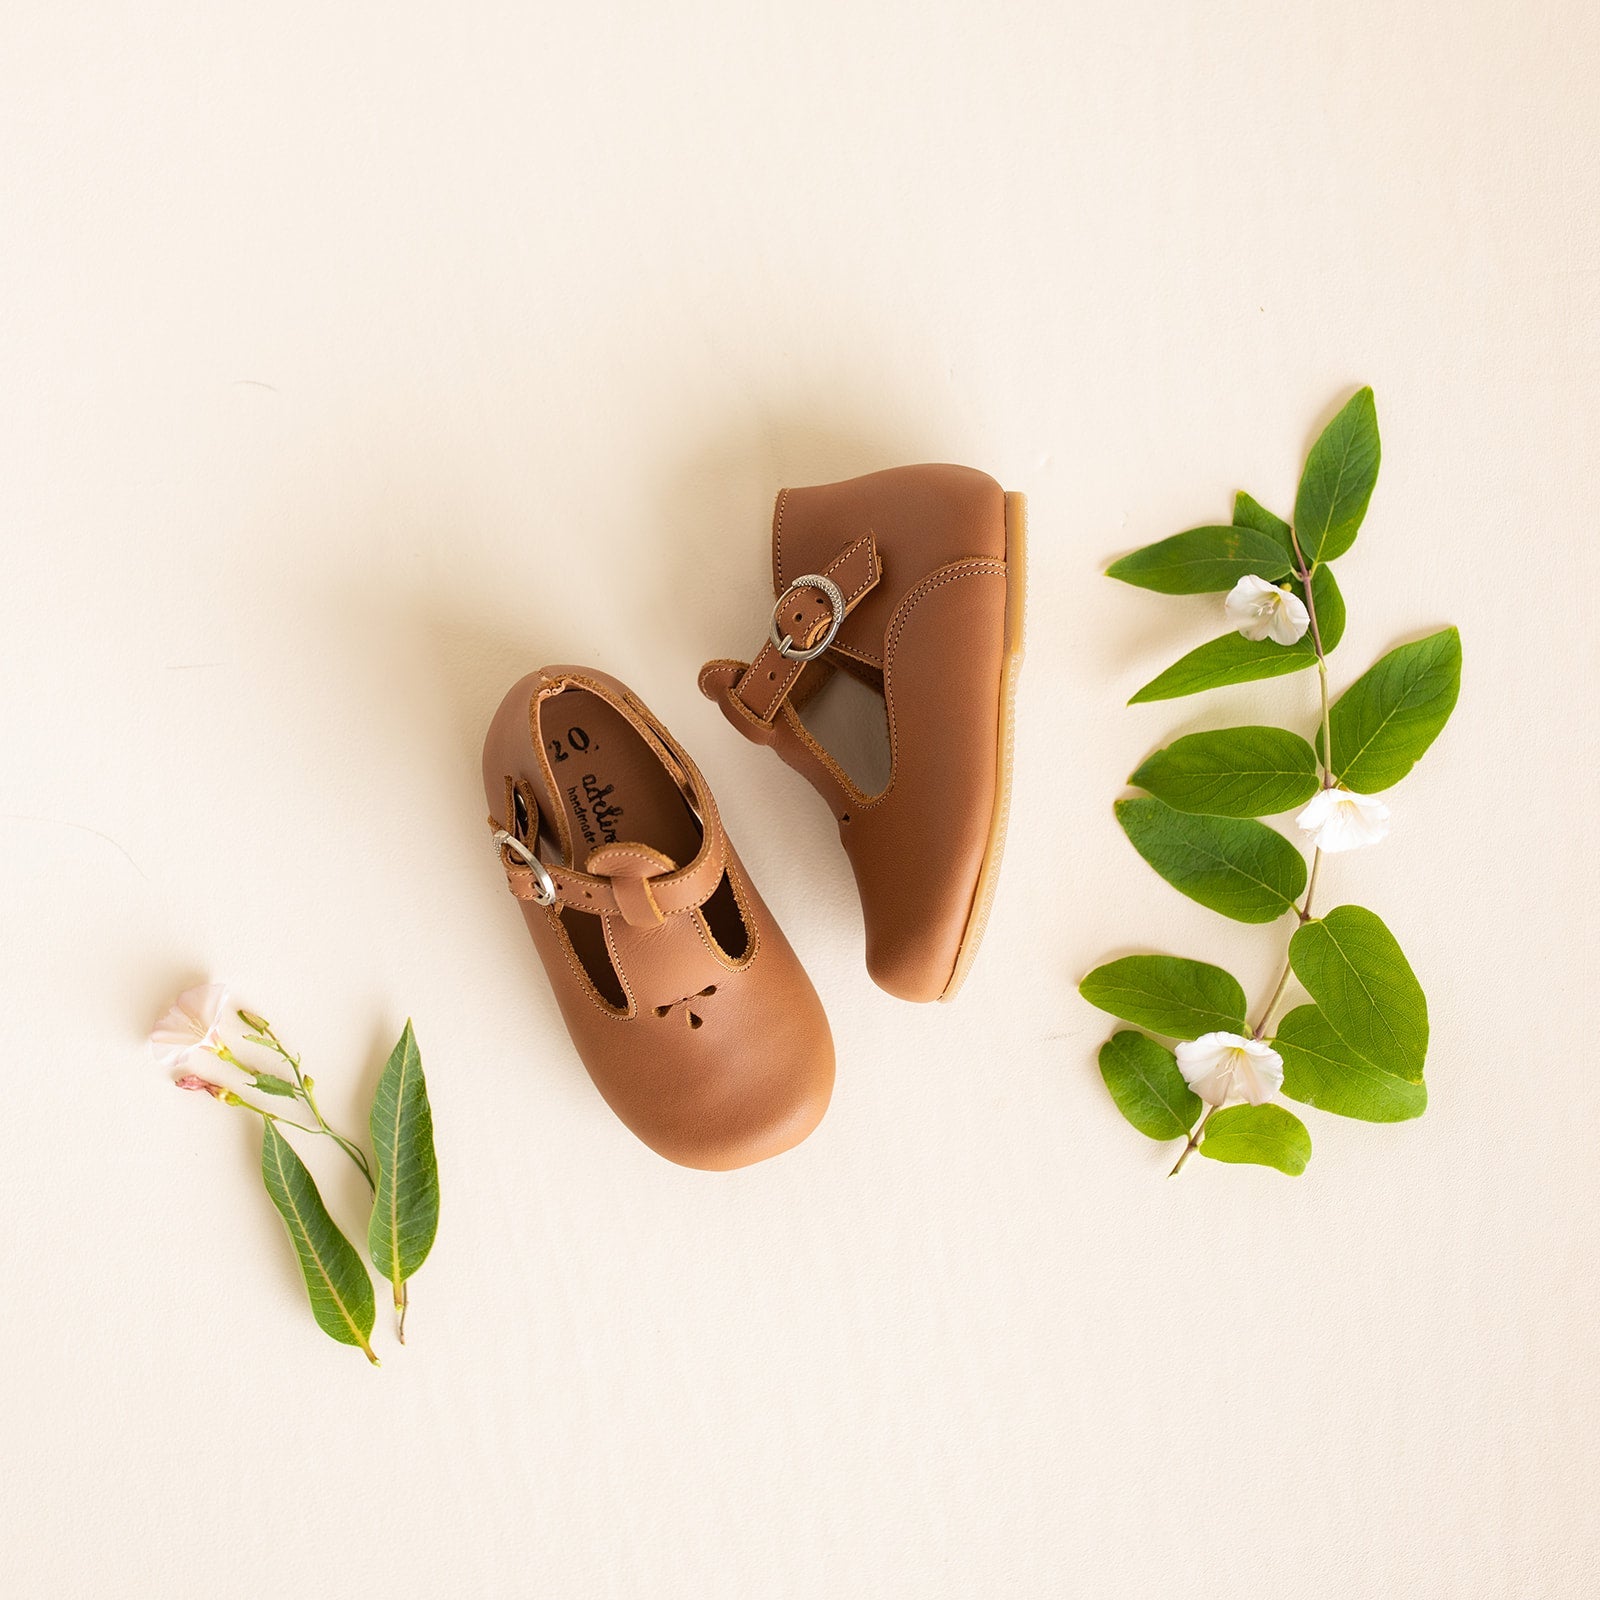 Medium brown leather Mary Janes for girls with floral detail.